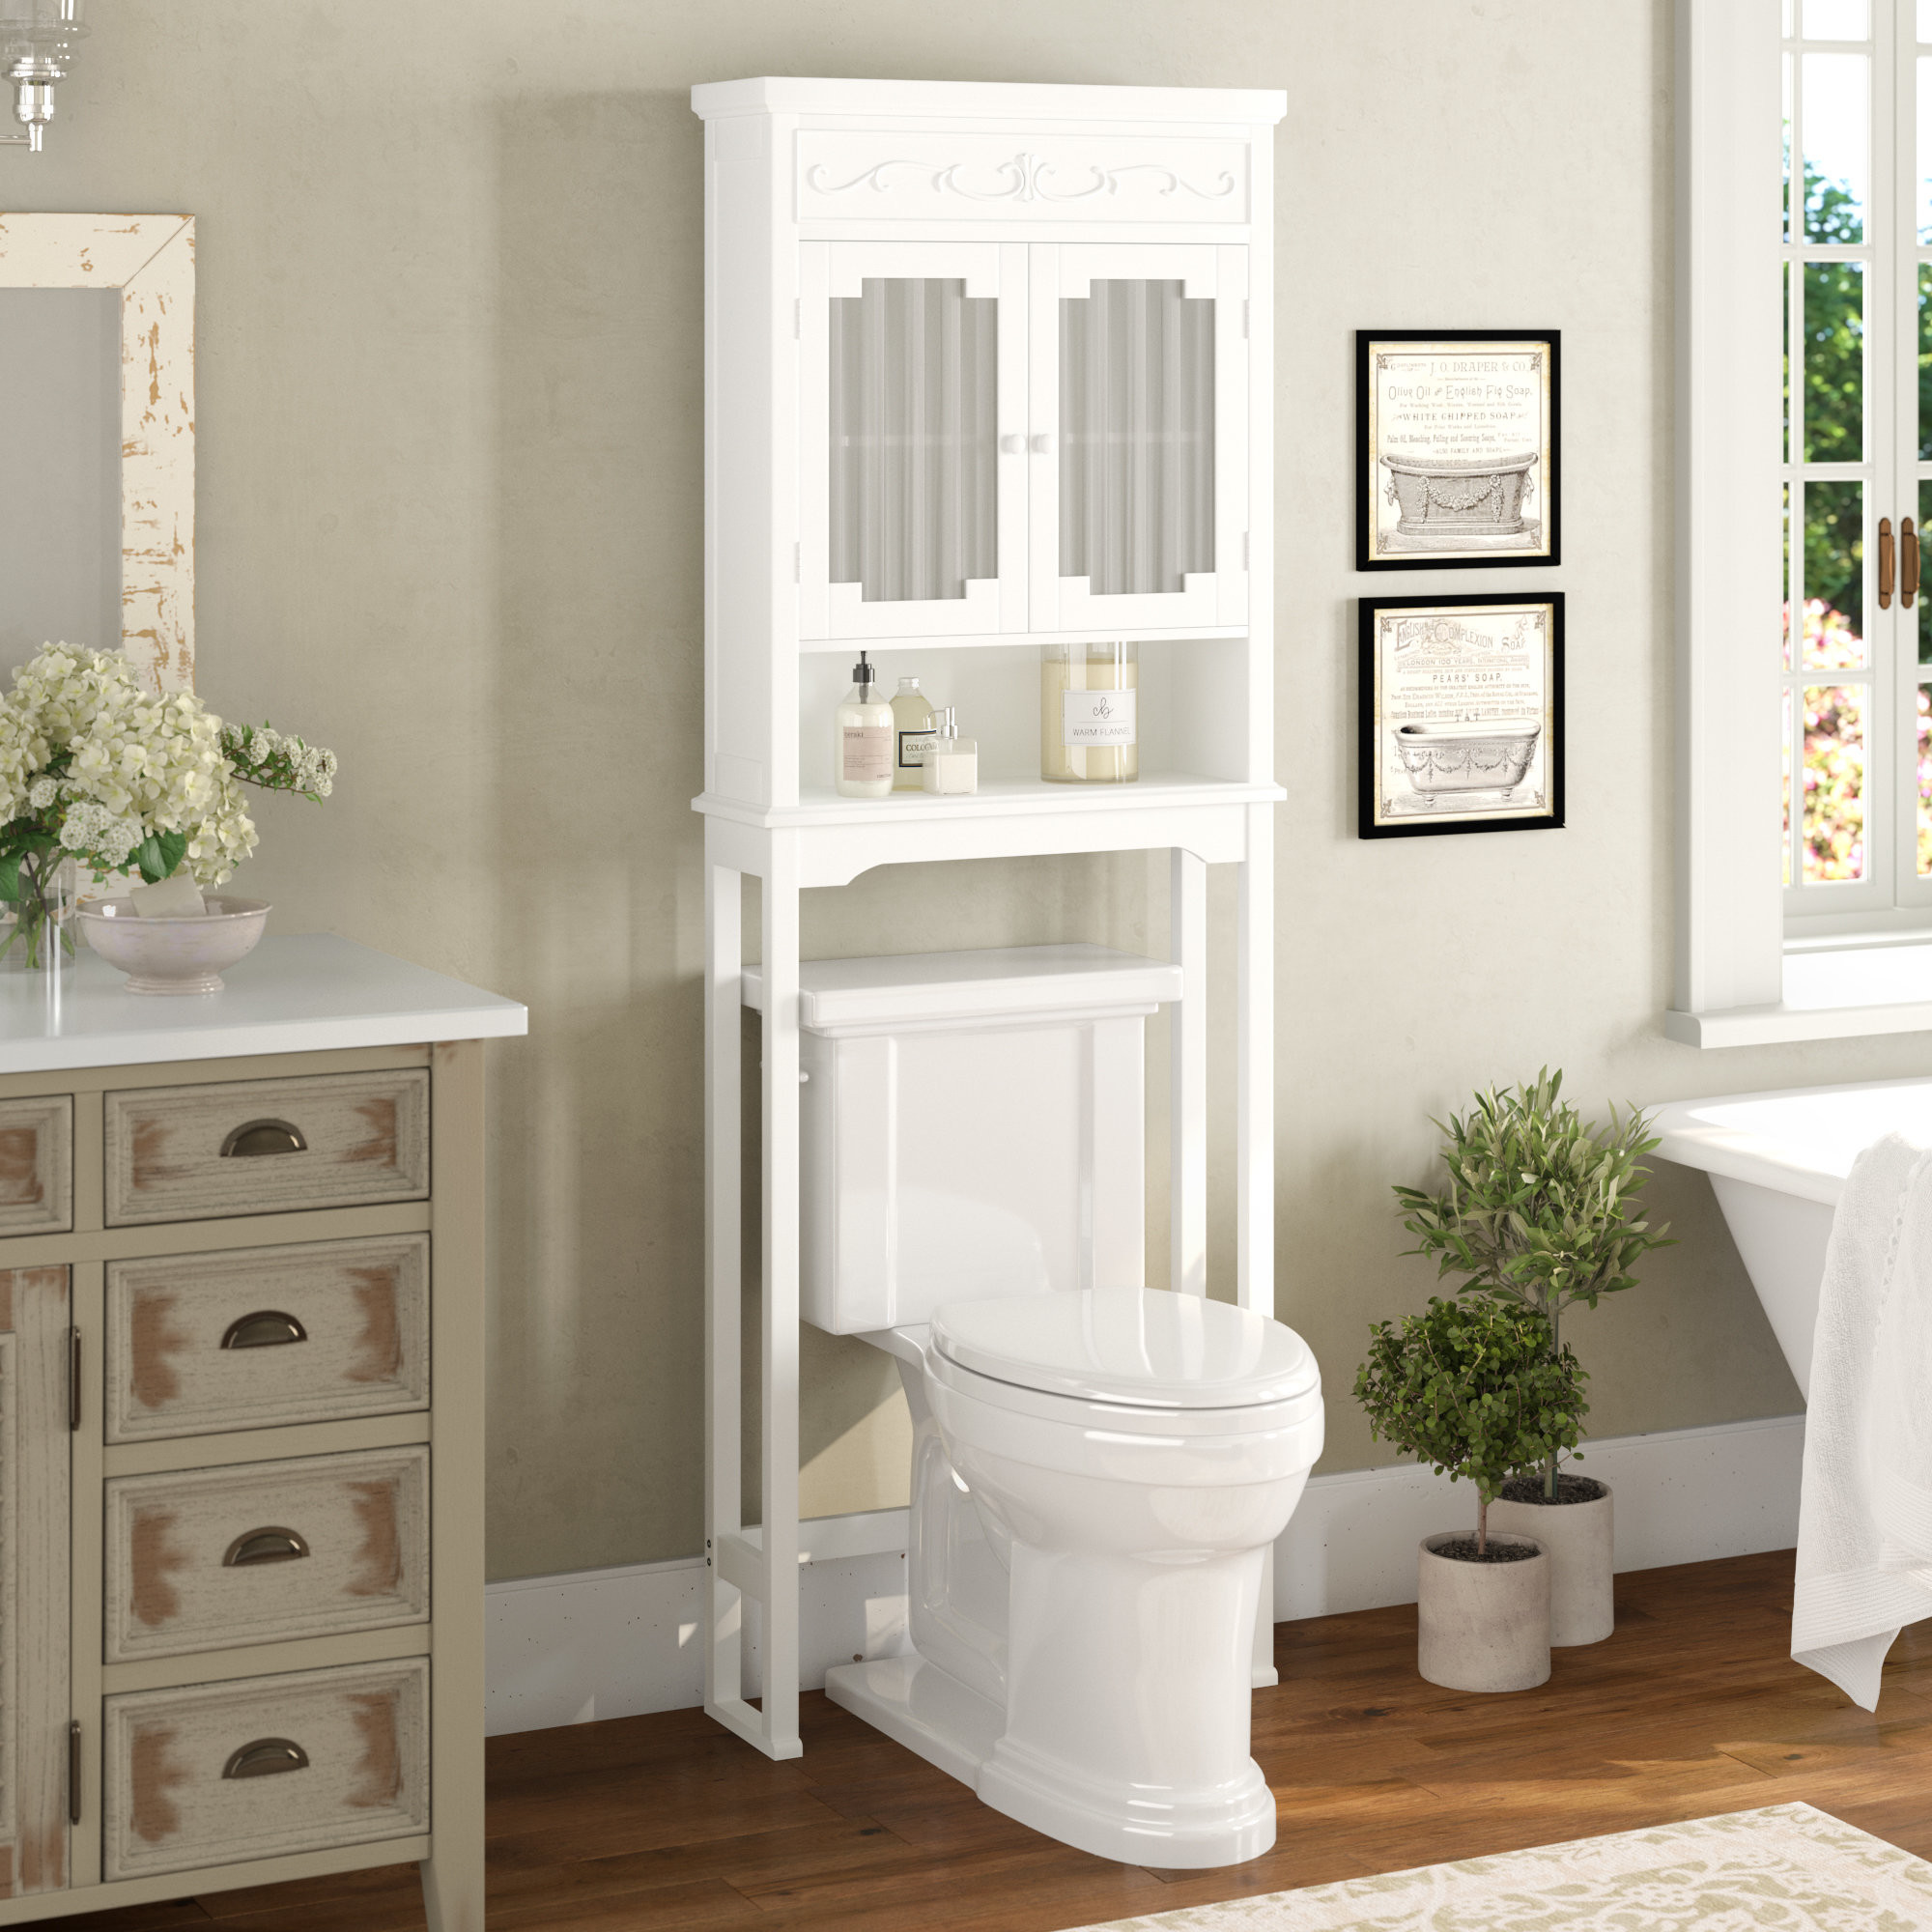 24 Unique Wayfair Tall Floor Vases 2024 free download wayfair tall floor vases of lark manor chapeau 24 w x 67 h over the toilet storage reviews intended for lark manor chapeau 24 w x 67 h over the toilet storage reviews wayfair